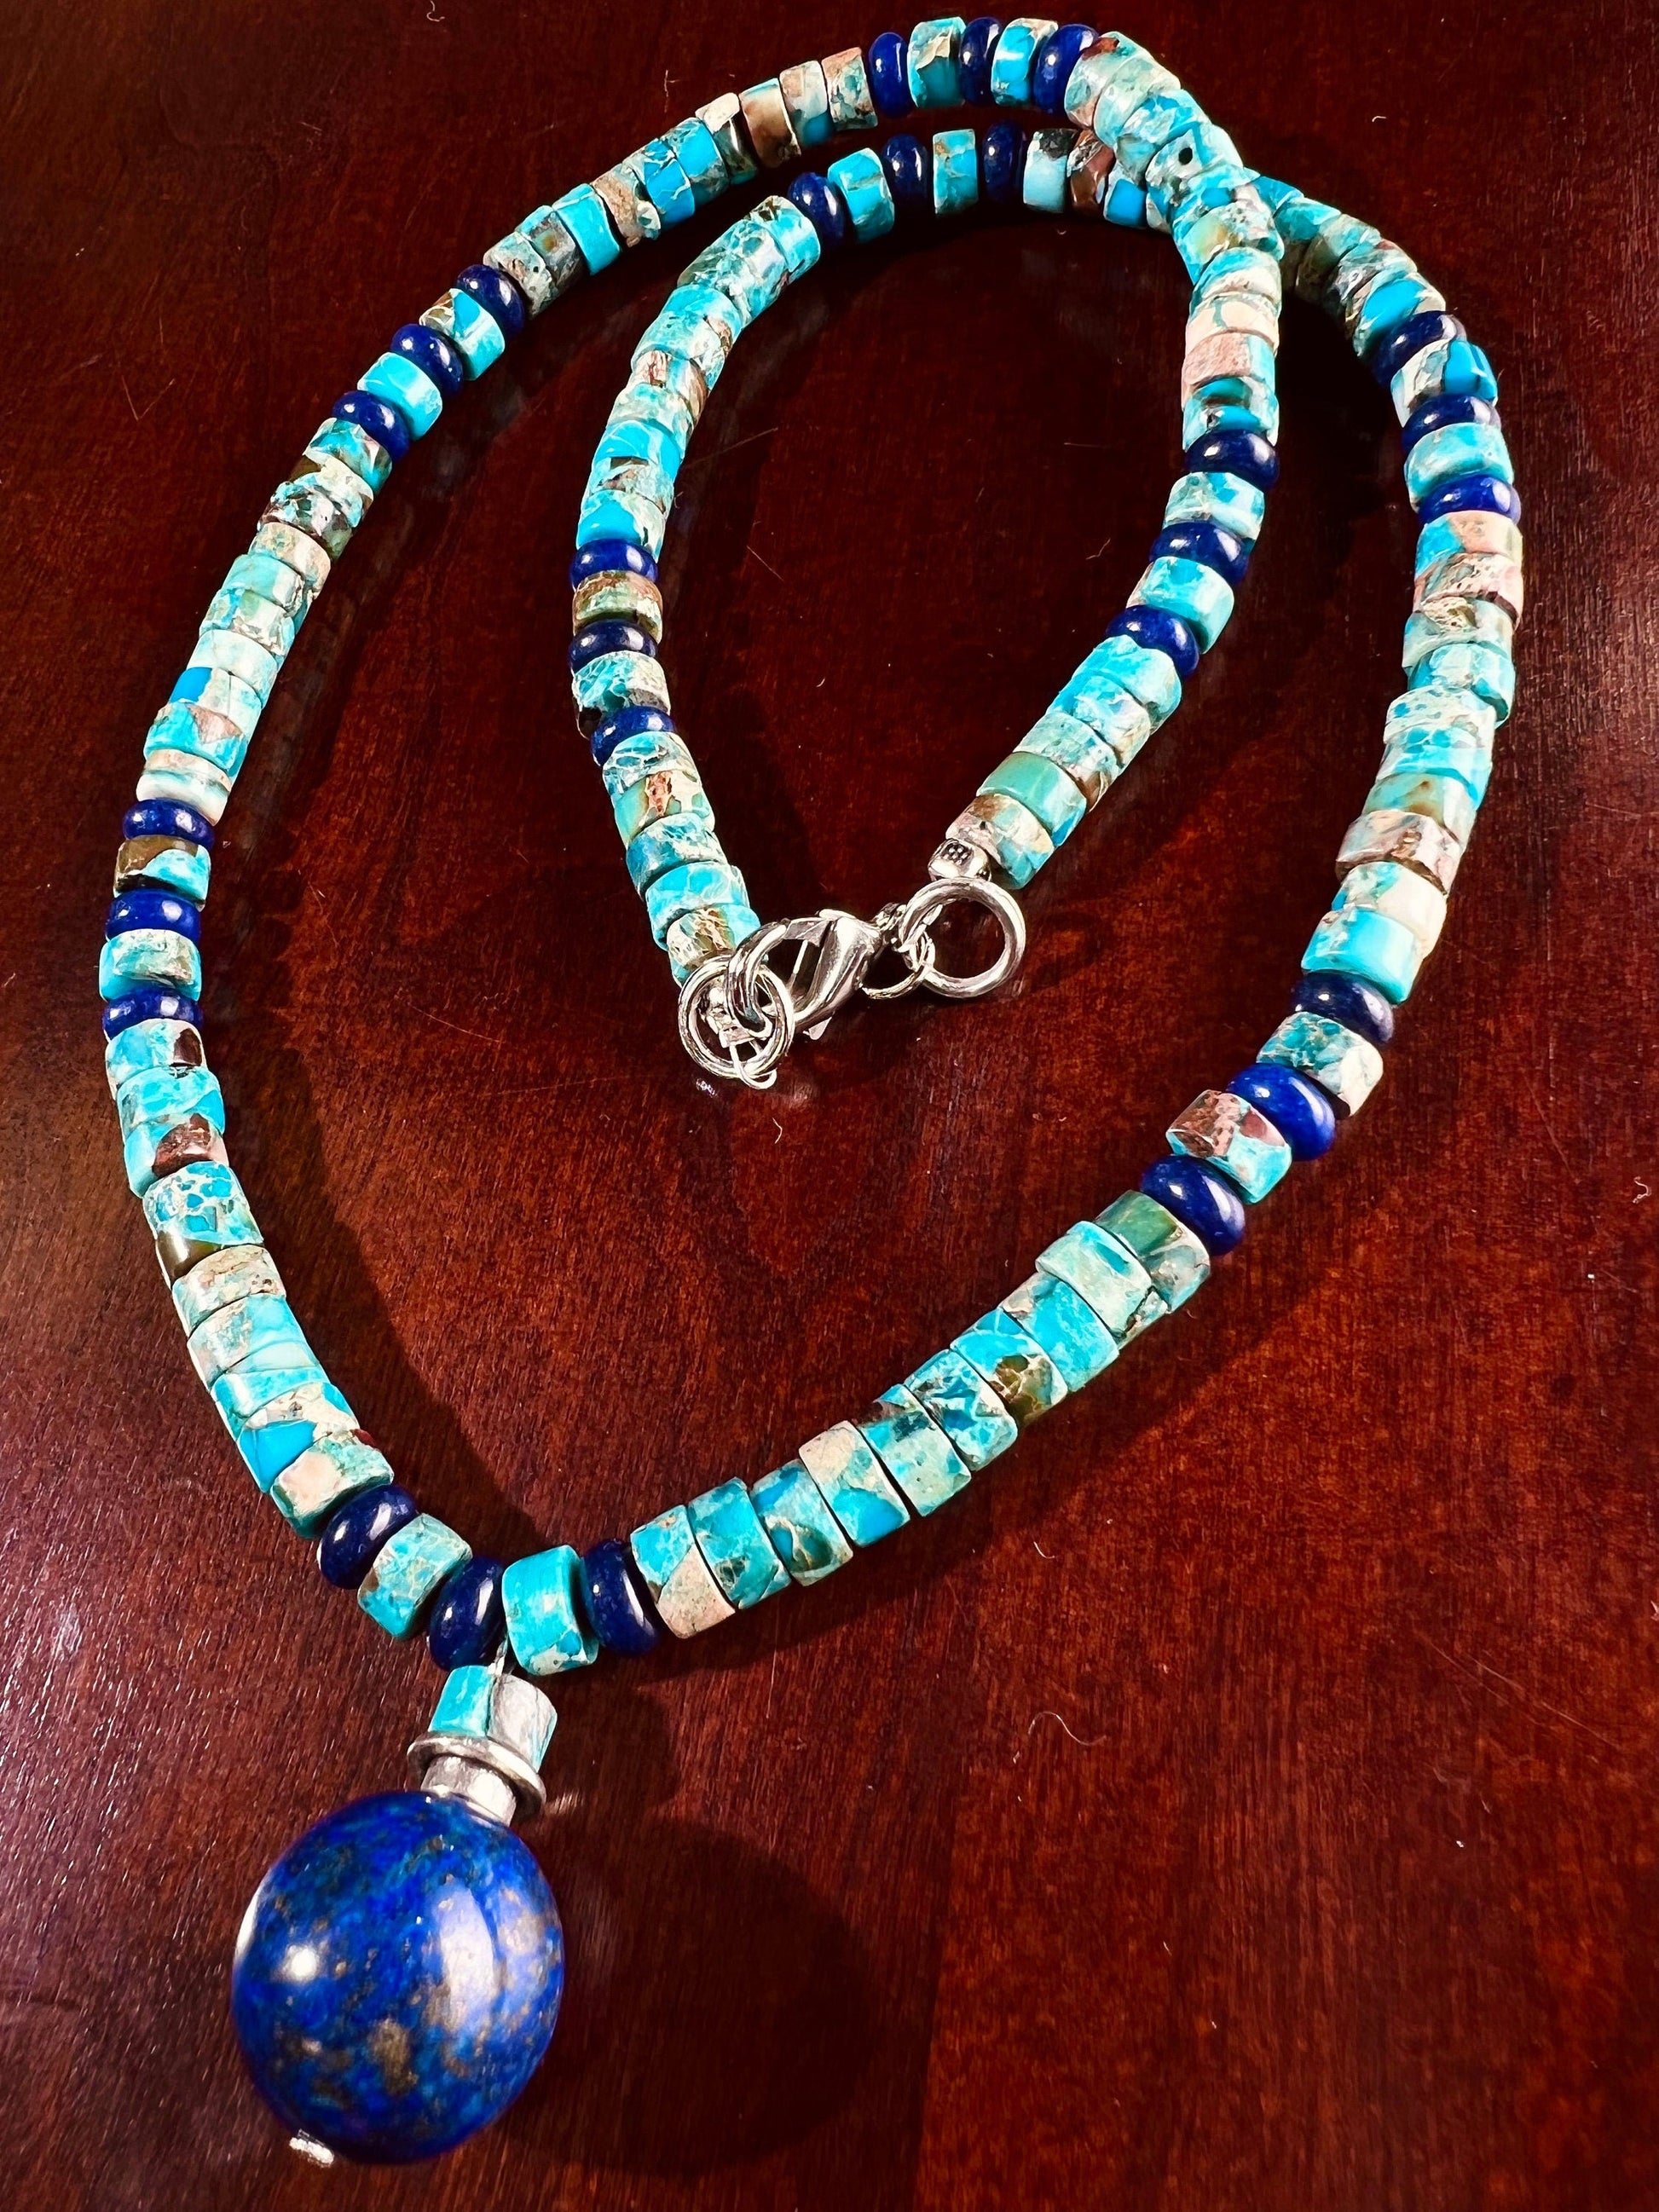 Lapis Lazuli and Turquoise Heishe Necklace, Lapis Roundel Spacer, Lapis Round 16mm Ball Centerpiece Pendant , beautiful gift 16&quot;-30&quot;